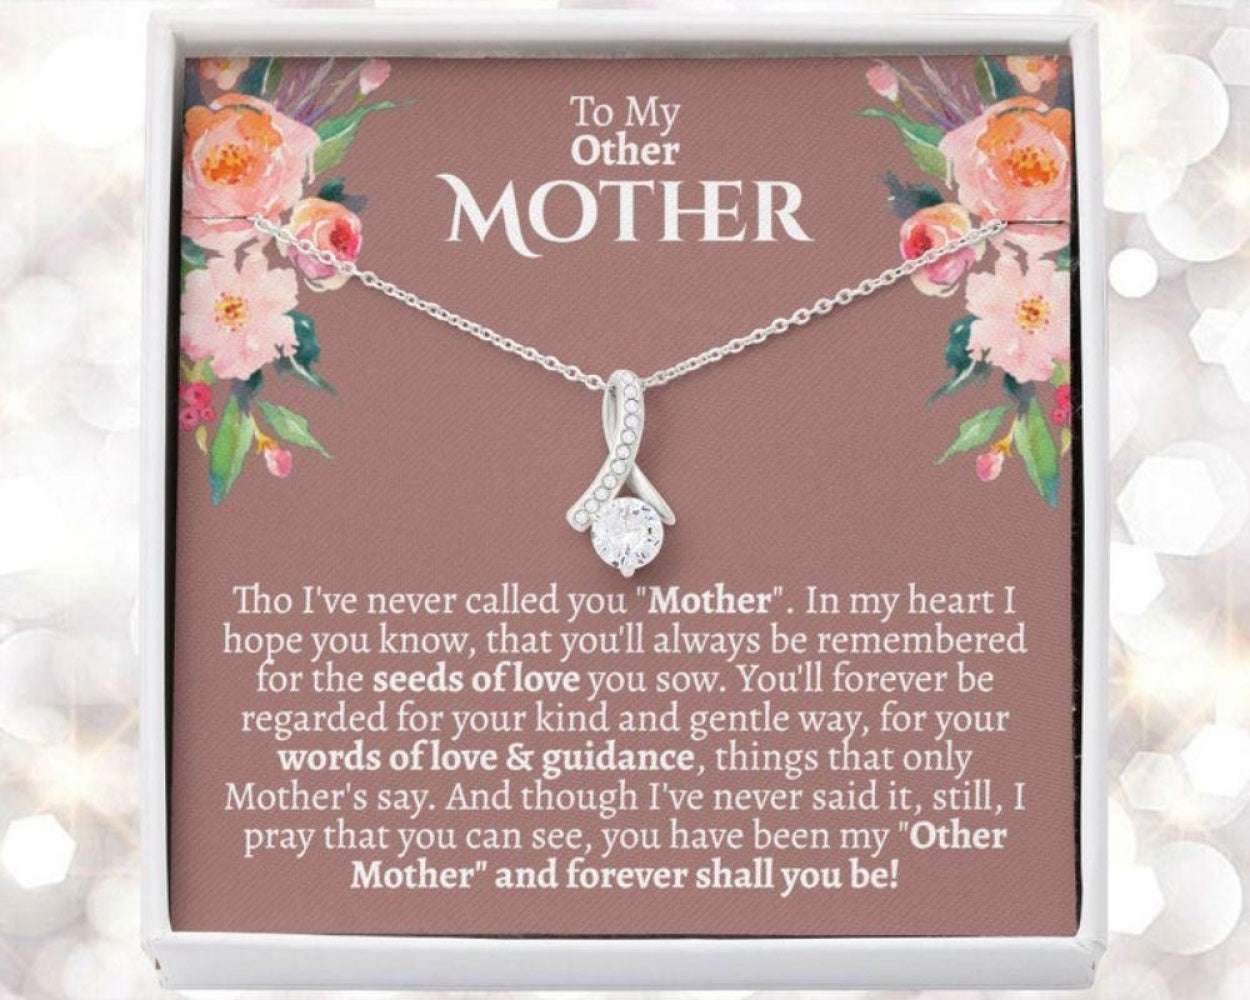 Bonus Mom Necklace, Other Mother Necklace, Gift For Second Mom, Mother-In-Law, Bonus Mom Gifts for Mother (Mom) Rakva